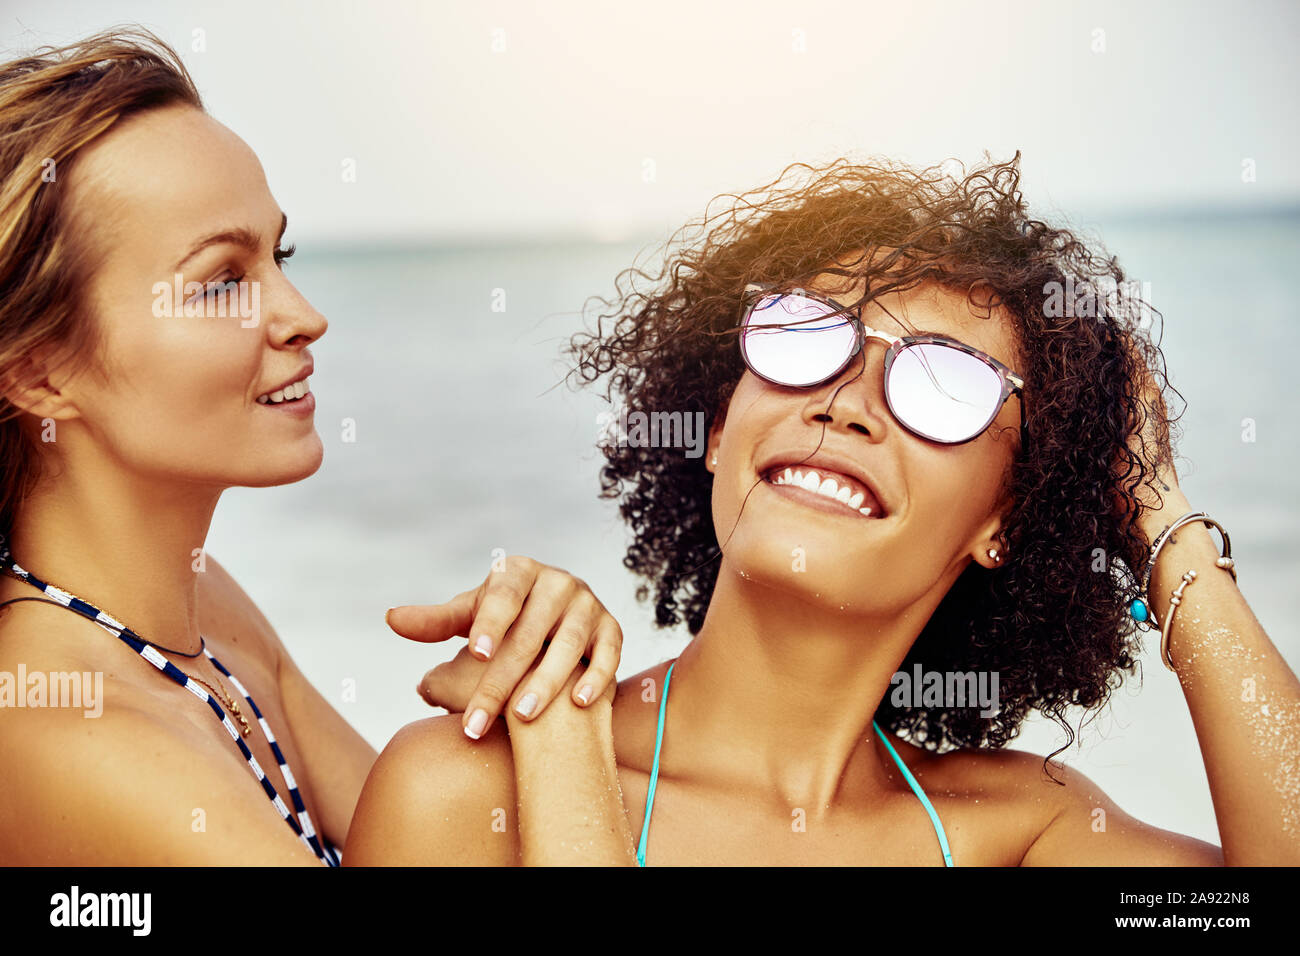 Two smiling young women standing together on a tropical beach while on summer vacation together Stock Photo